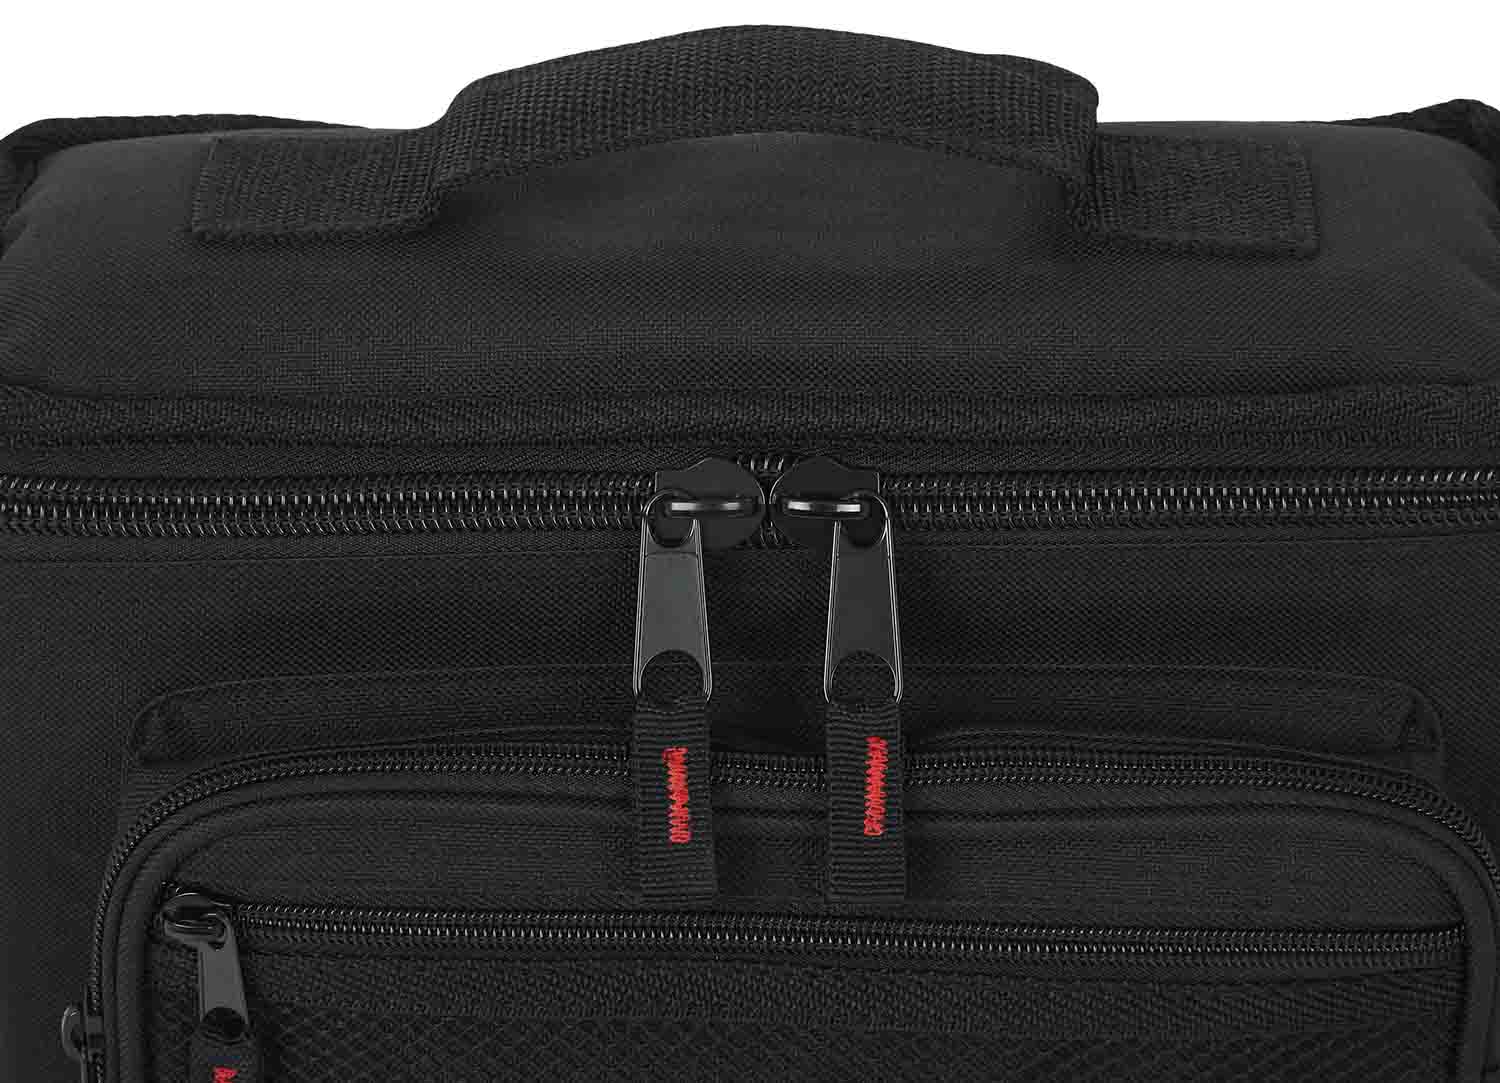 Gator Cases GM-4 DJ Bag for 4 Microphones with Exterior Pockets for Cables - Hollywood DJ